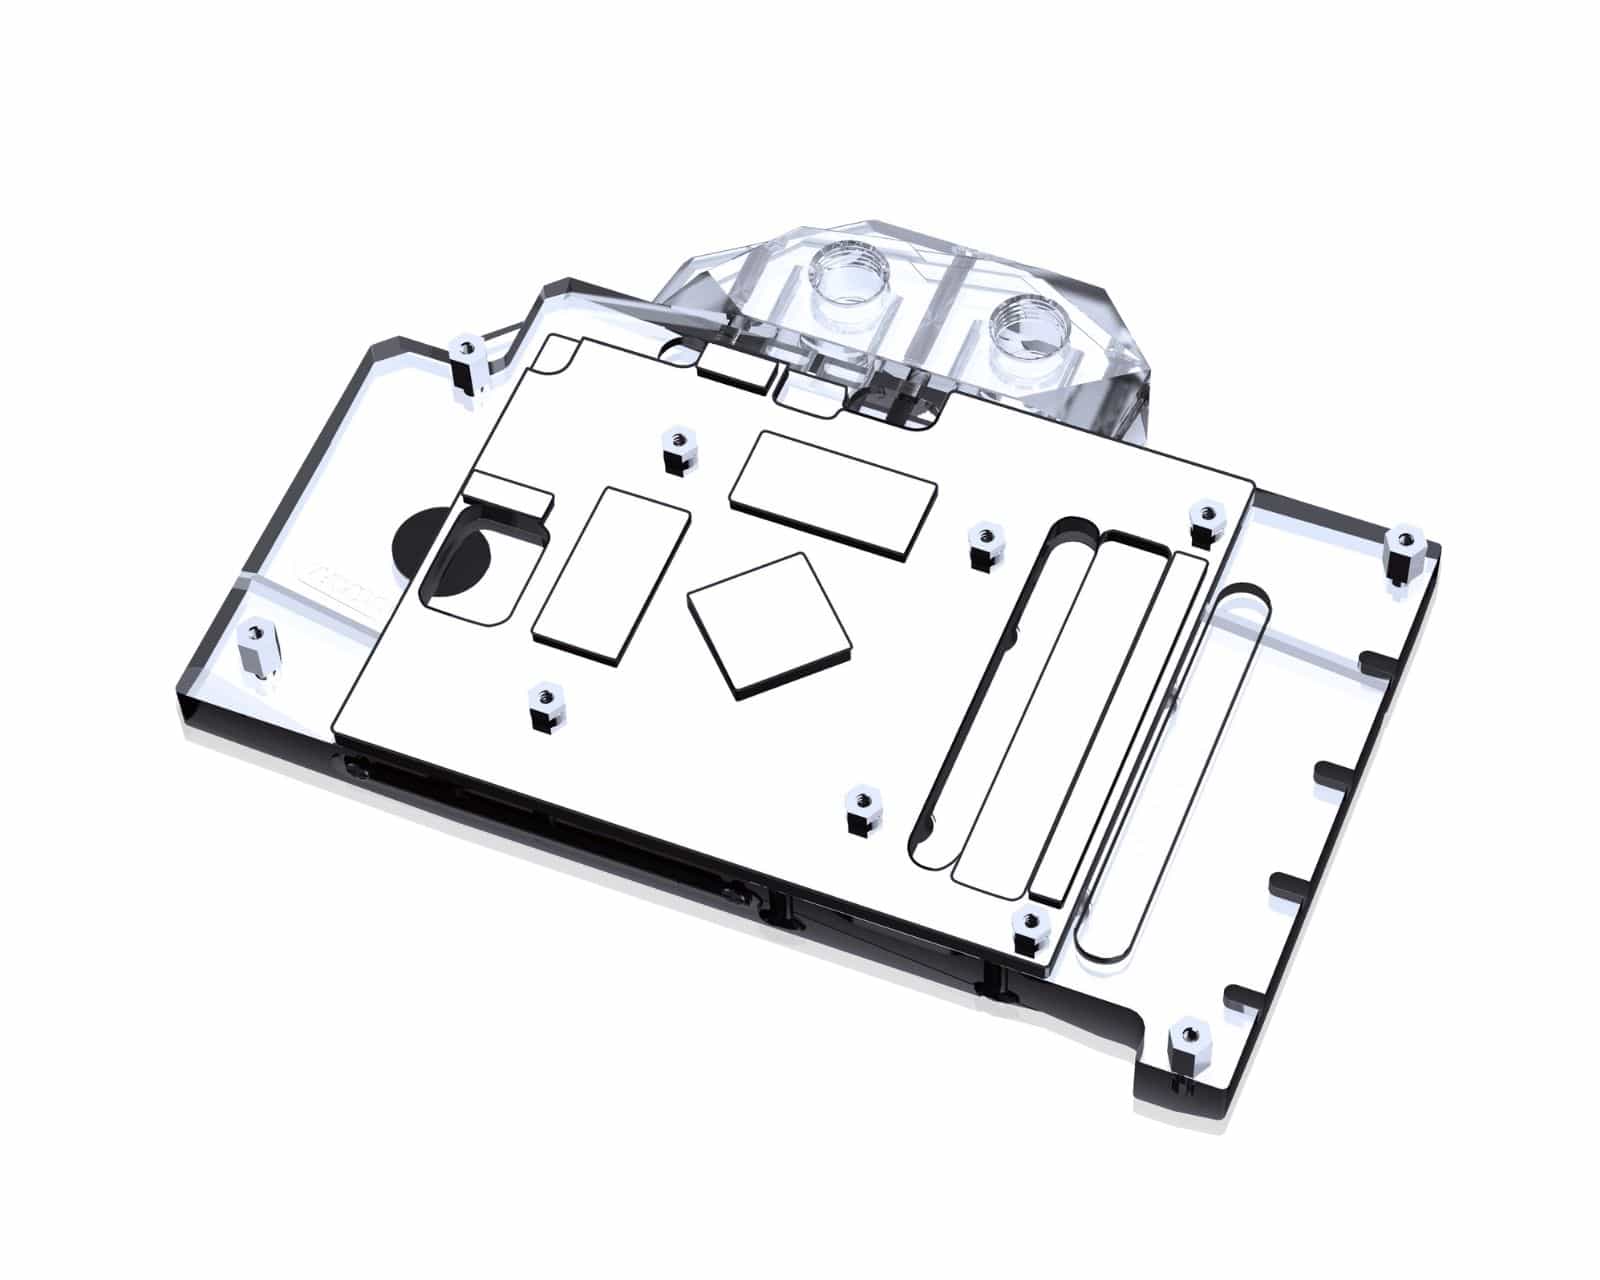 Bykski Full Coverage GPU Water Block and Backplate for GIGABYTE Radeon RX 6600 XT EAGLE (A-GV6600XT-X) - PrimoChill - KEEPING IT COOL